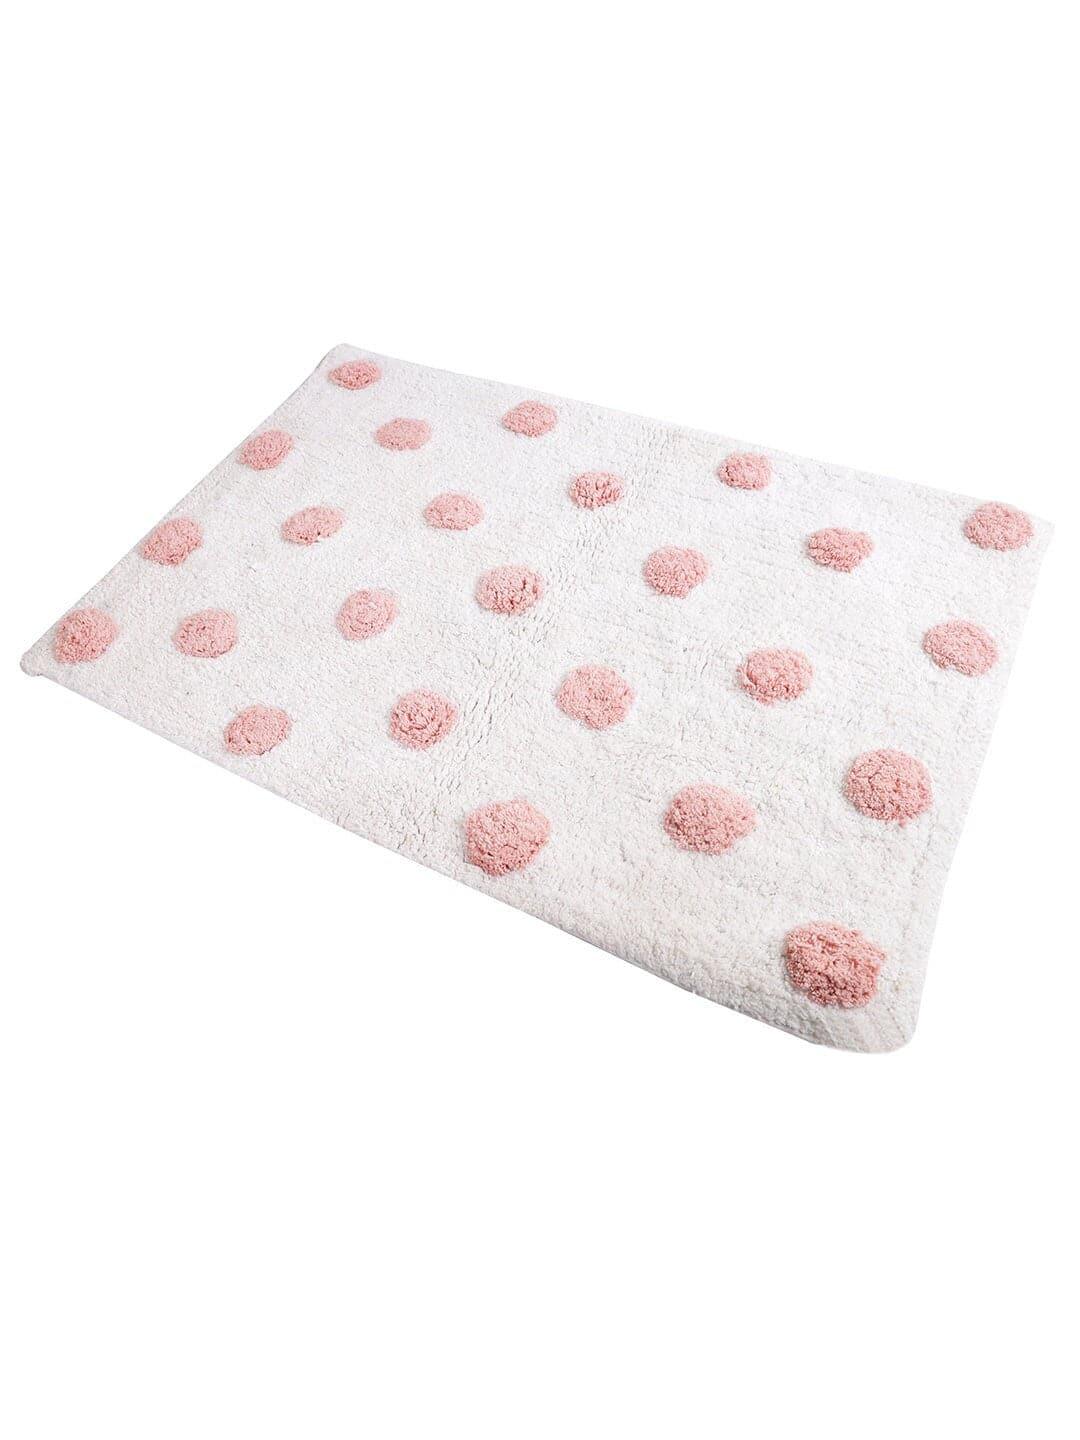 Pink and White Polka Dots Hand Tufted Cotton Bath Rug - MAIA HOMES